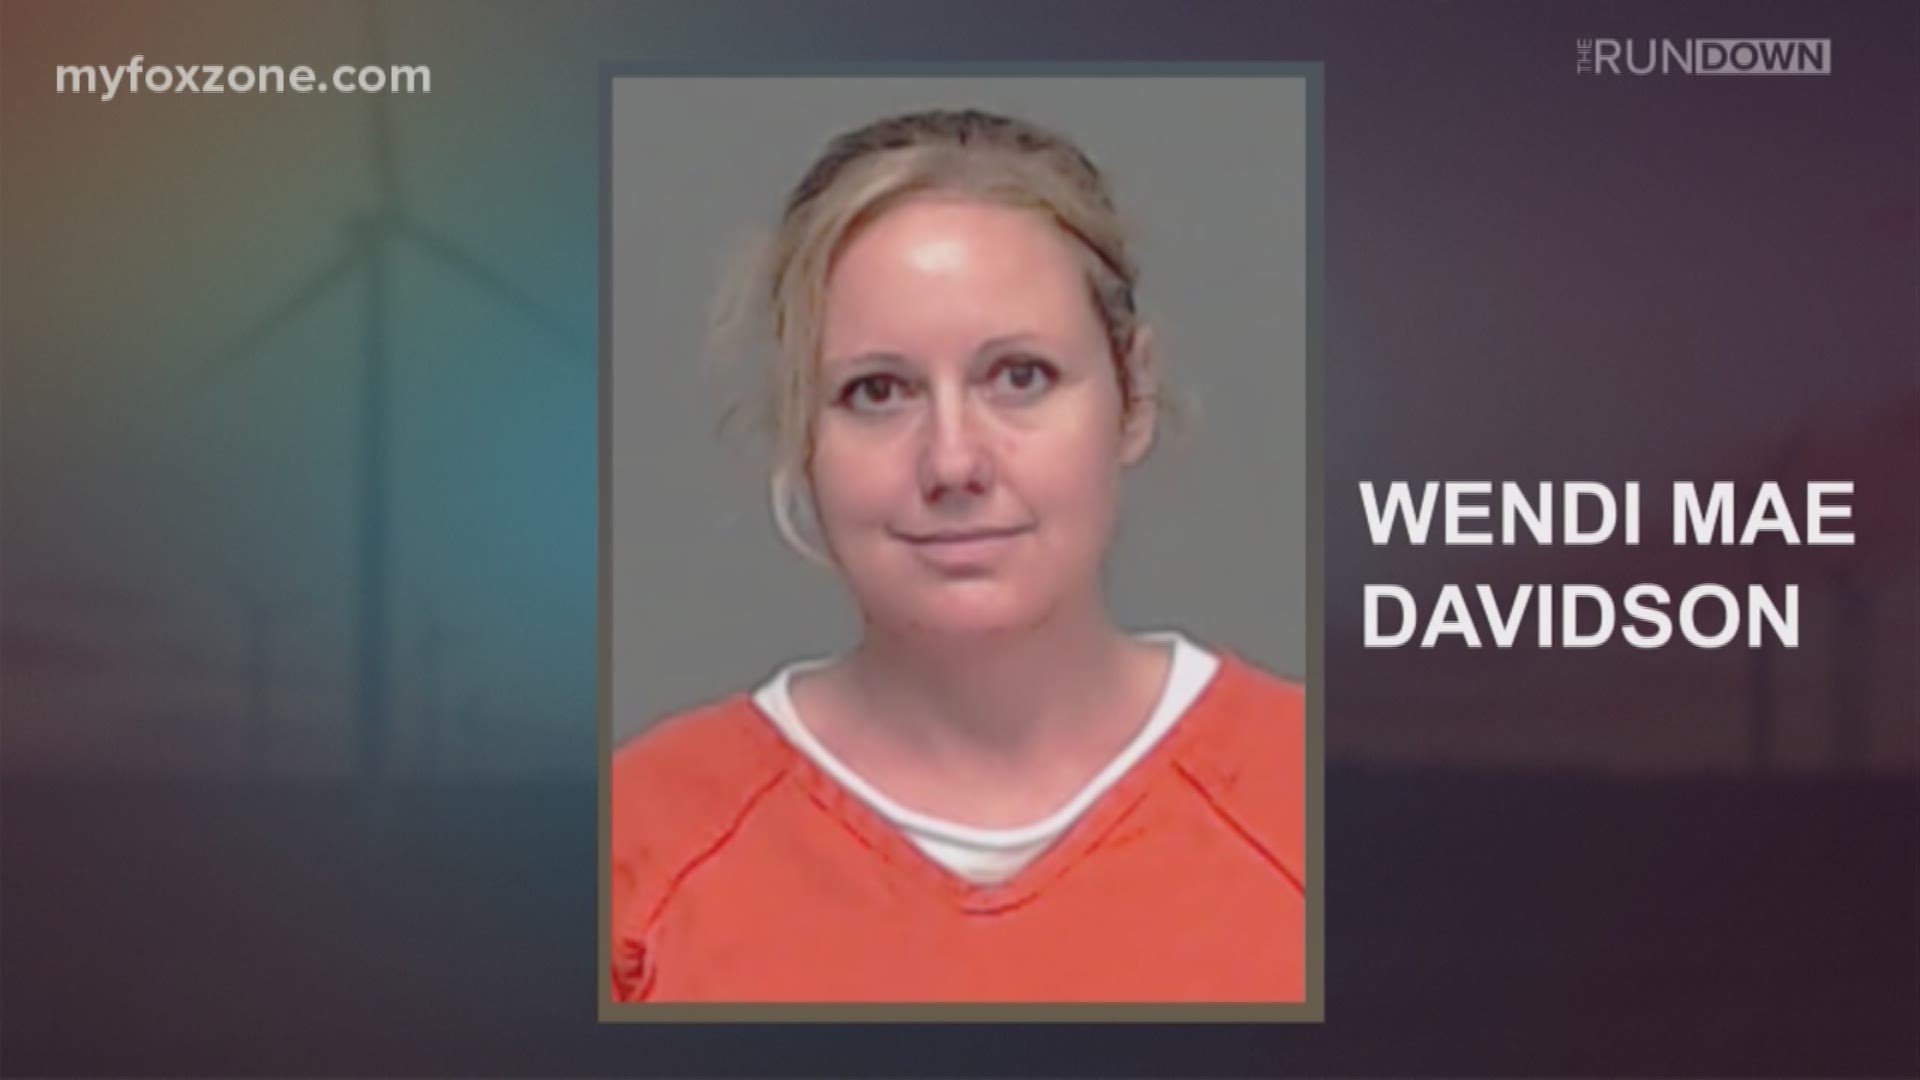 Wendi Mae Davidson, who is serving a 25-year sentence for the murder of her husband, Michael Severance, appeared in the TGC Jail logs Tuesday morning.